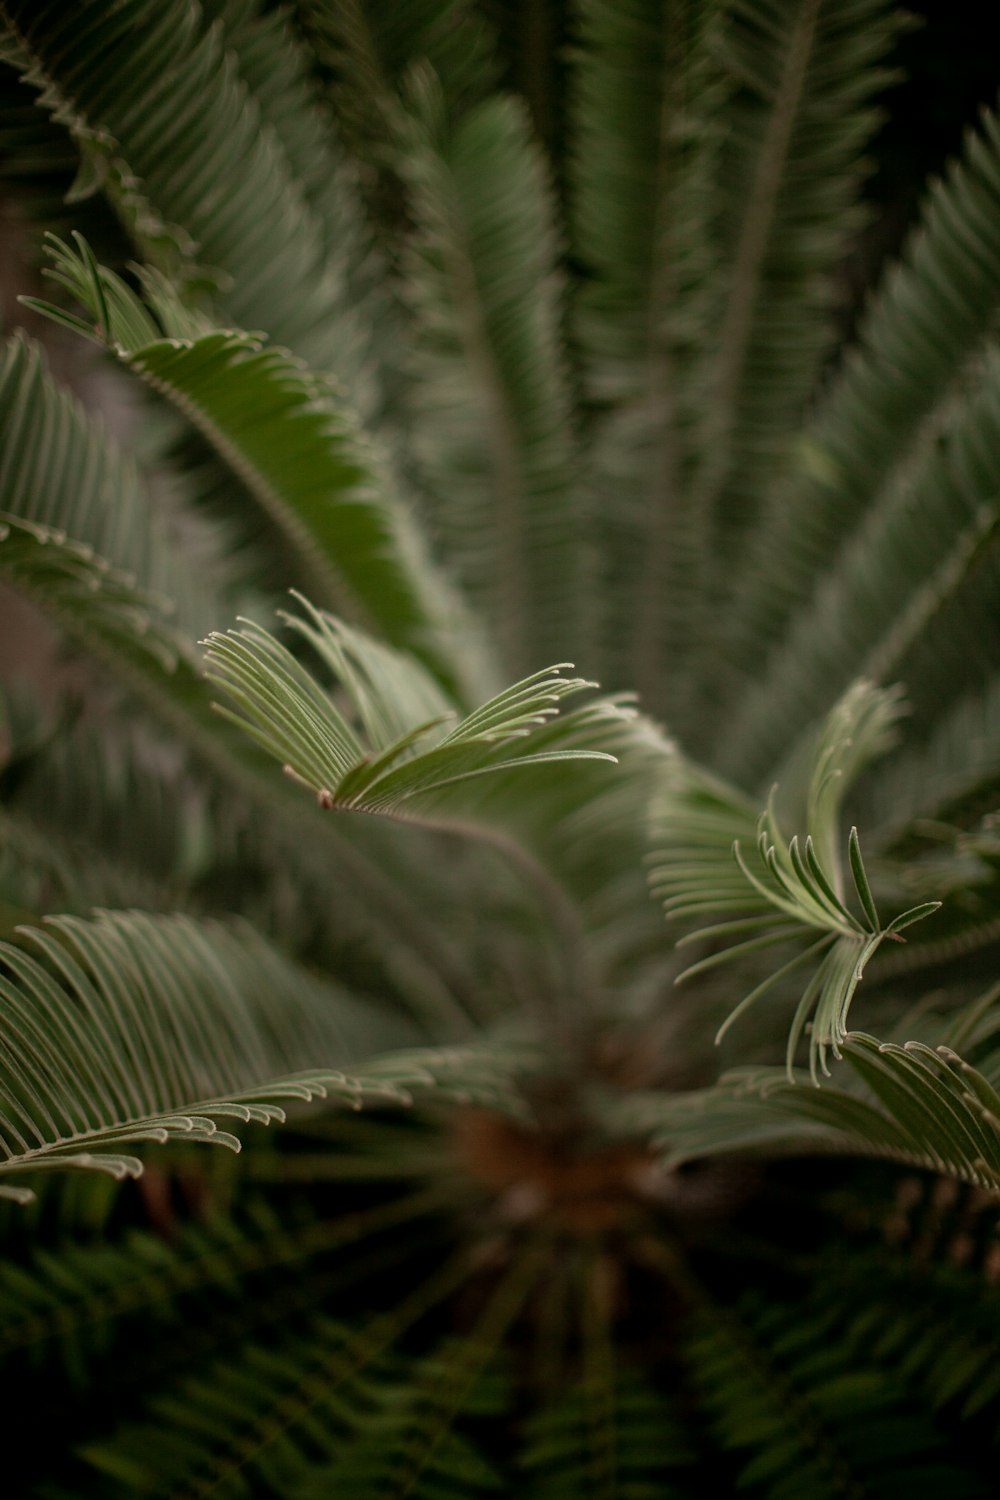 green fern plan in close-up photo